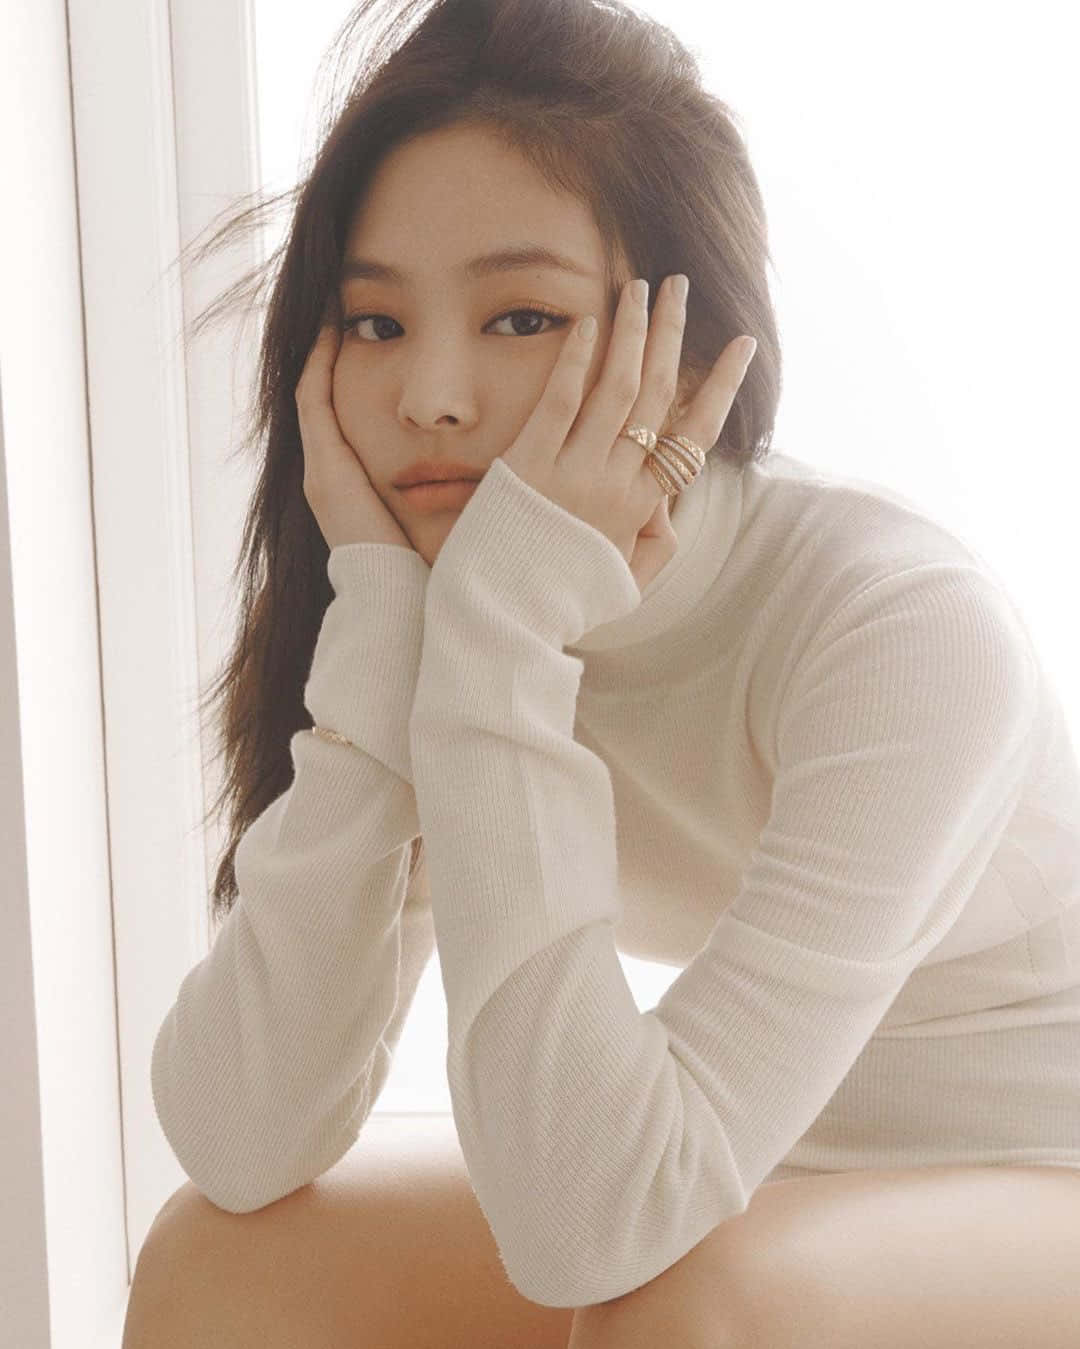 Cozy-Looking Jennie Picture